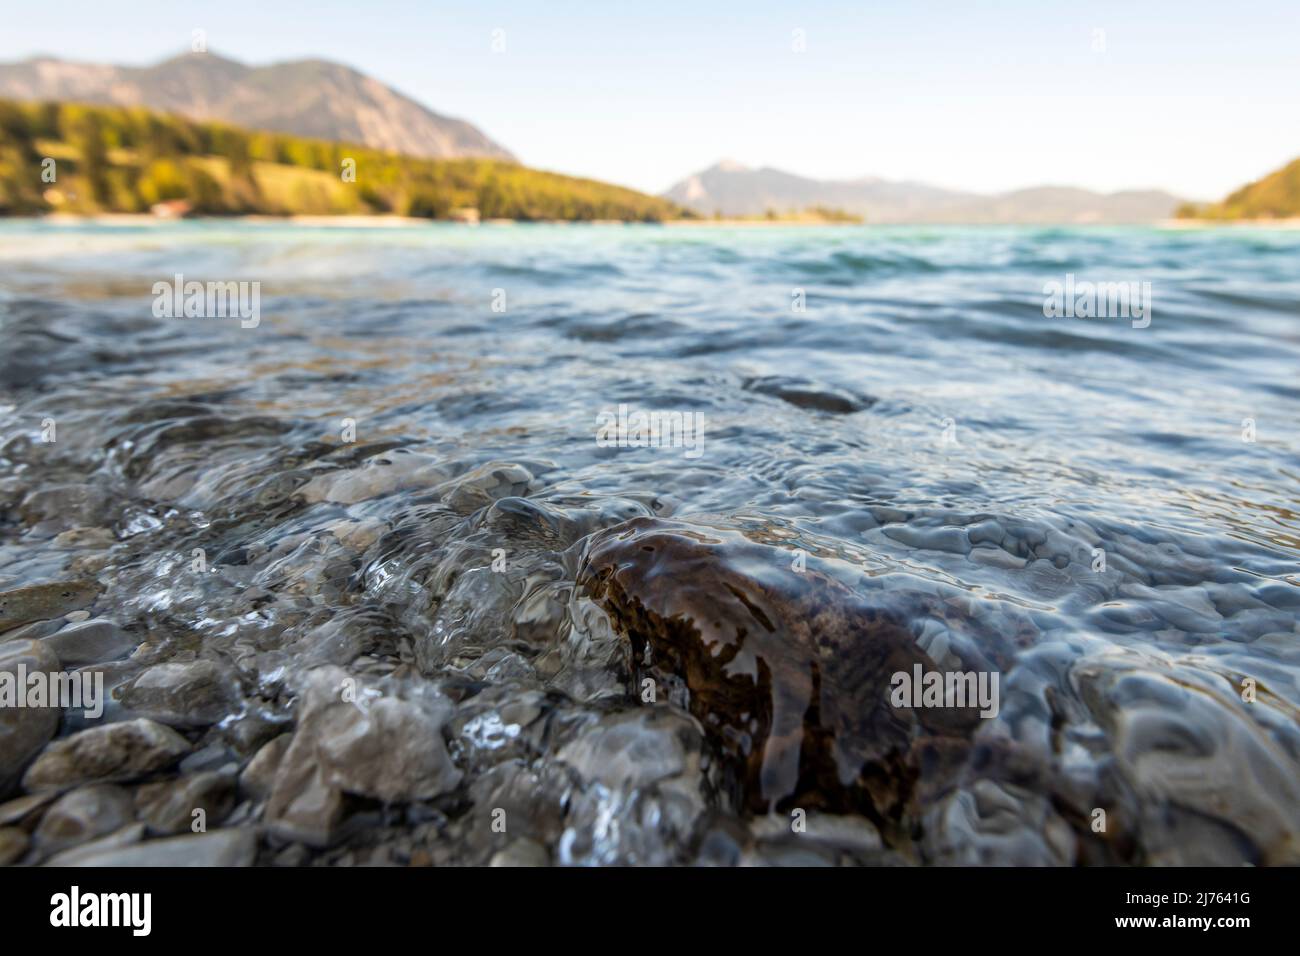 A pair of common toad (female is the larger/lower) on the shore of Walchensee in the Bavarian Alps on a gravel beach under blue skies, struggling with the swell of the lake in early spring. Stock Photo